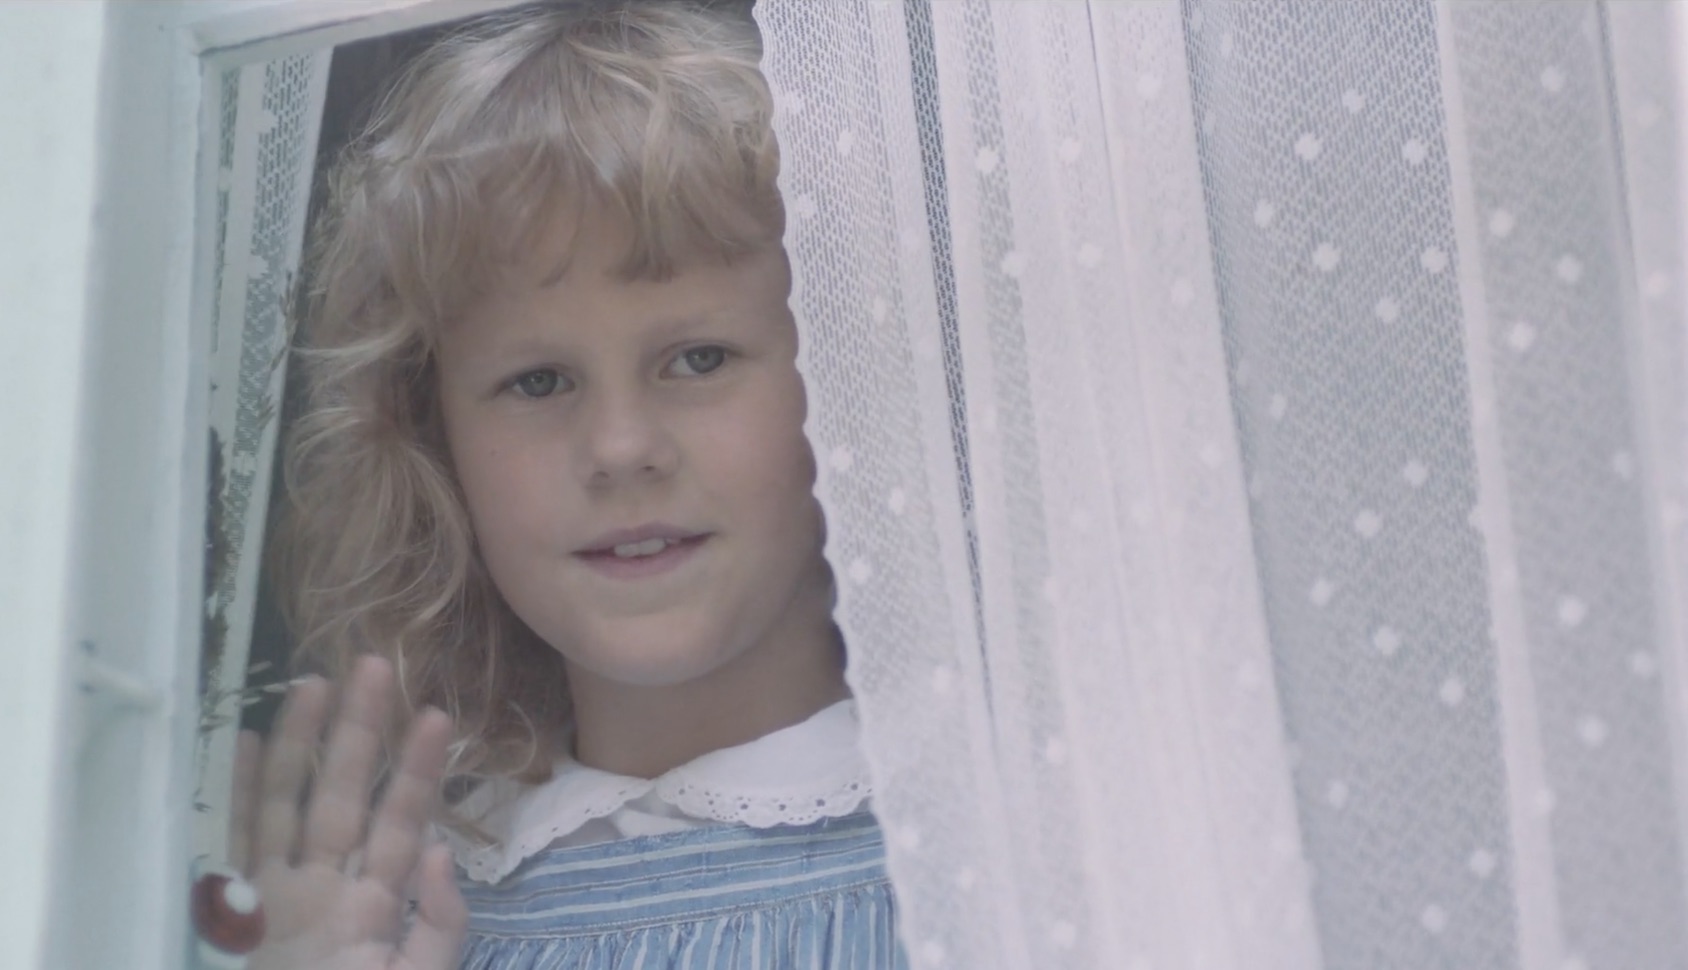 Young girl looks through window with lace curtain and waves